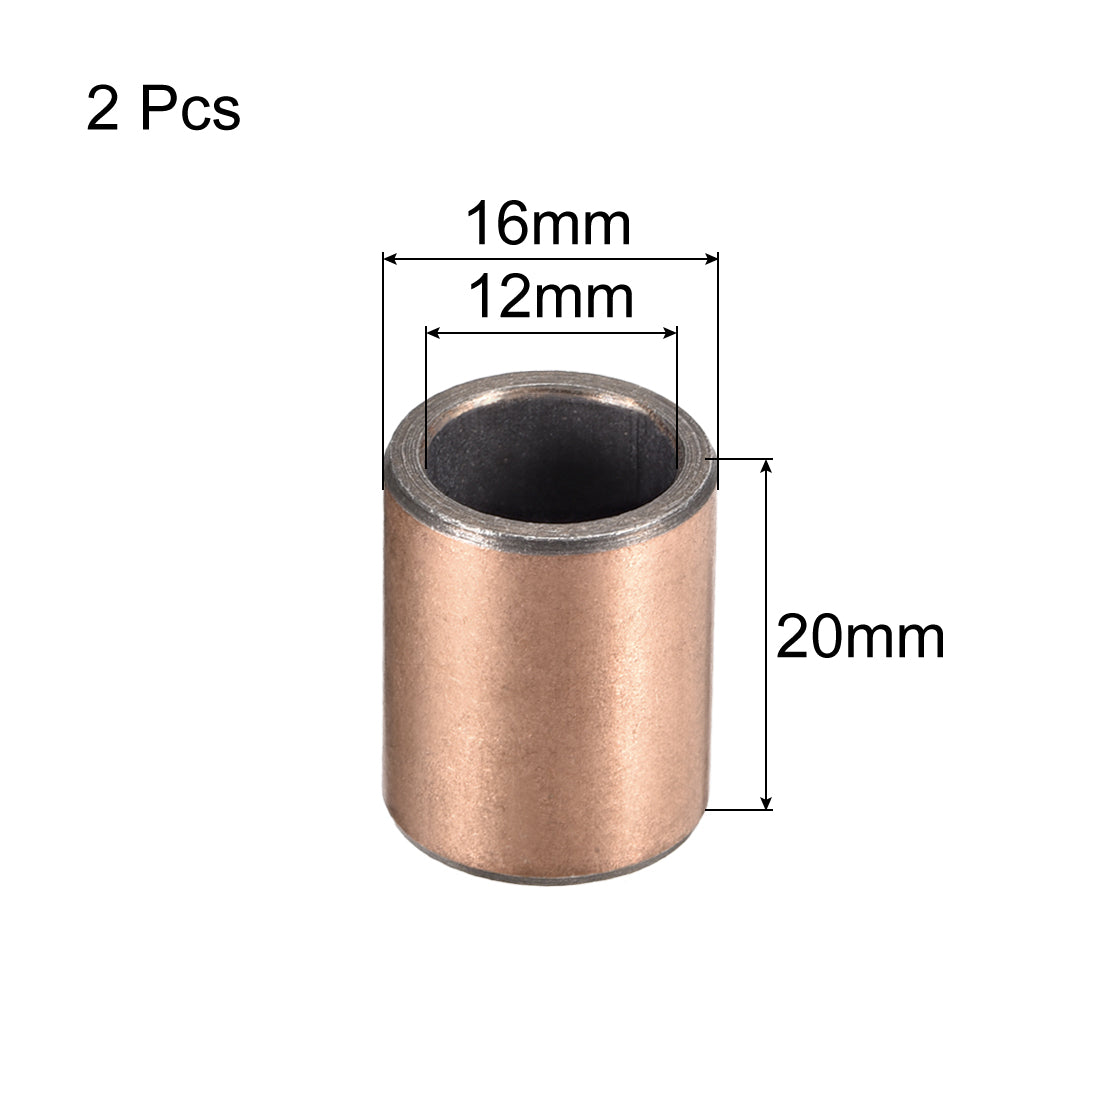 uxcell Uxcell Sleeve (Plain) Bearings 12mm Bore 16mm OD 20mm L Wrapped Oilless Bushings 2pcs